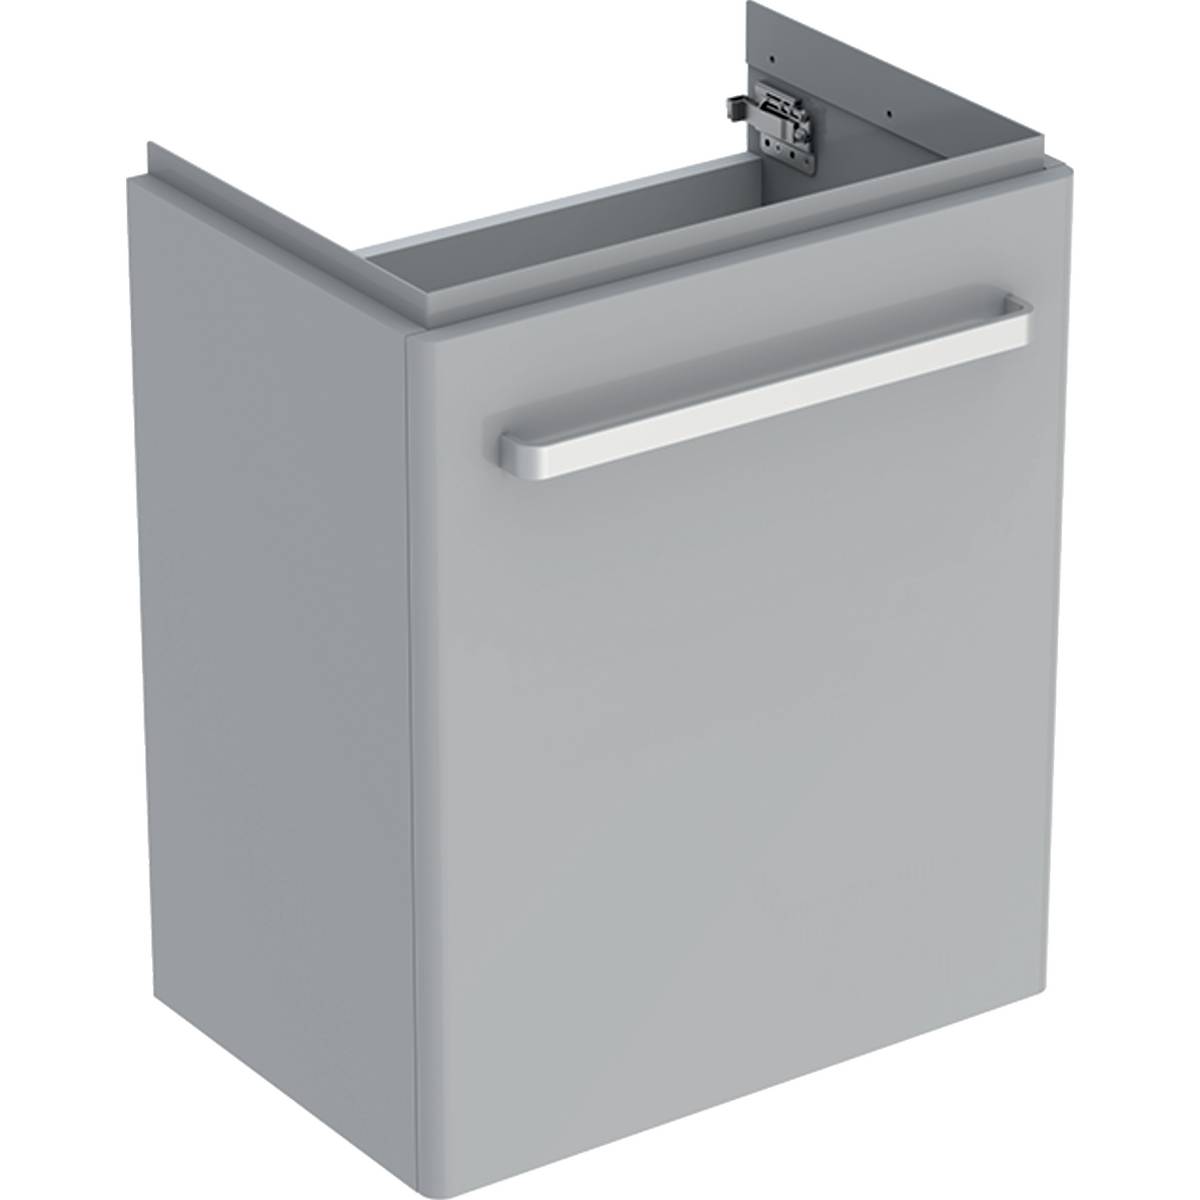 Selnova Compact cabinet for washbasin, with one door and service space